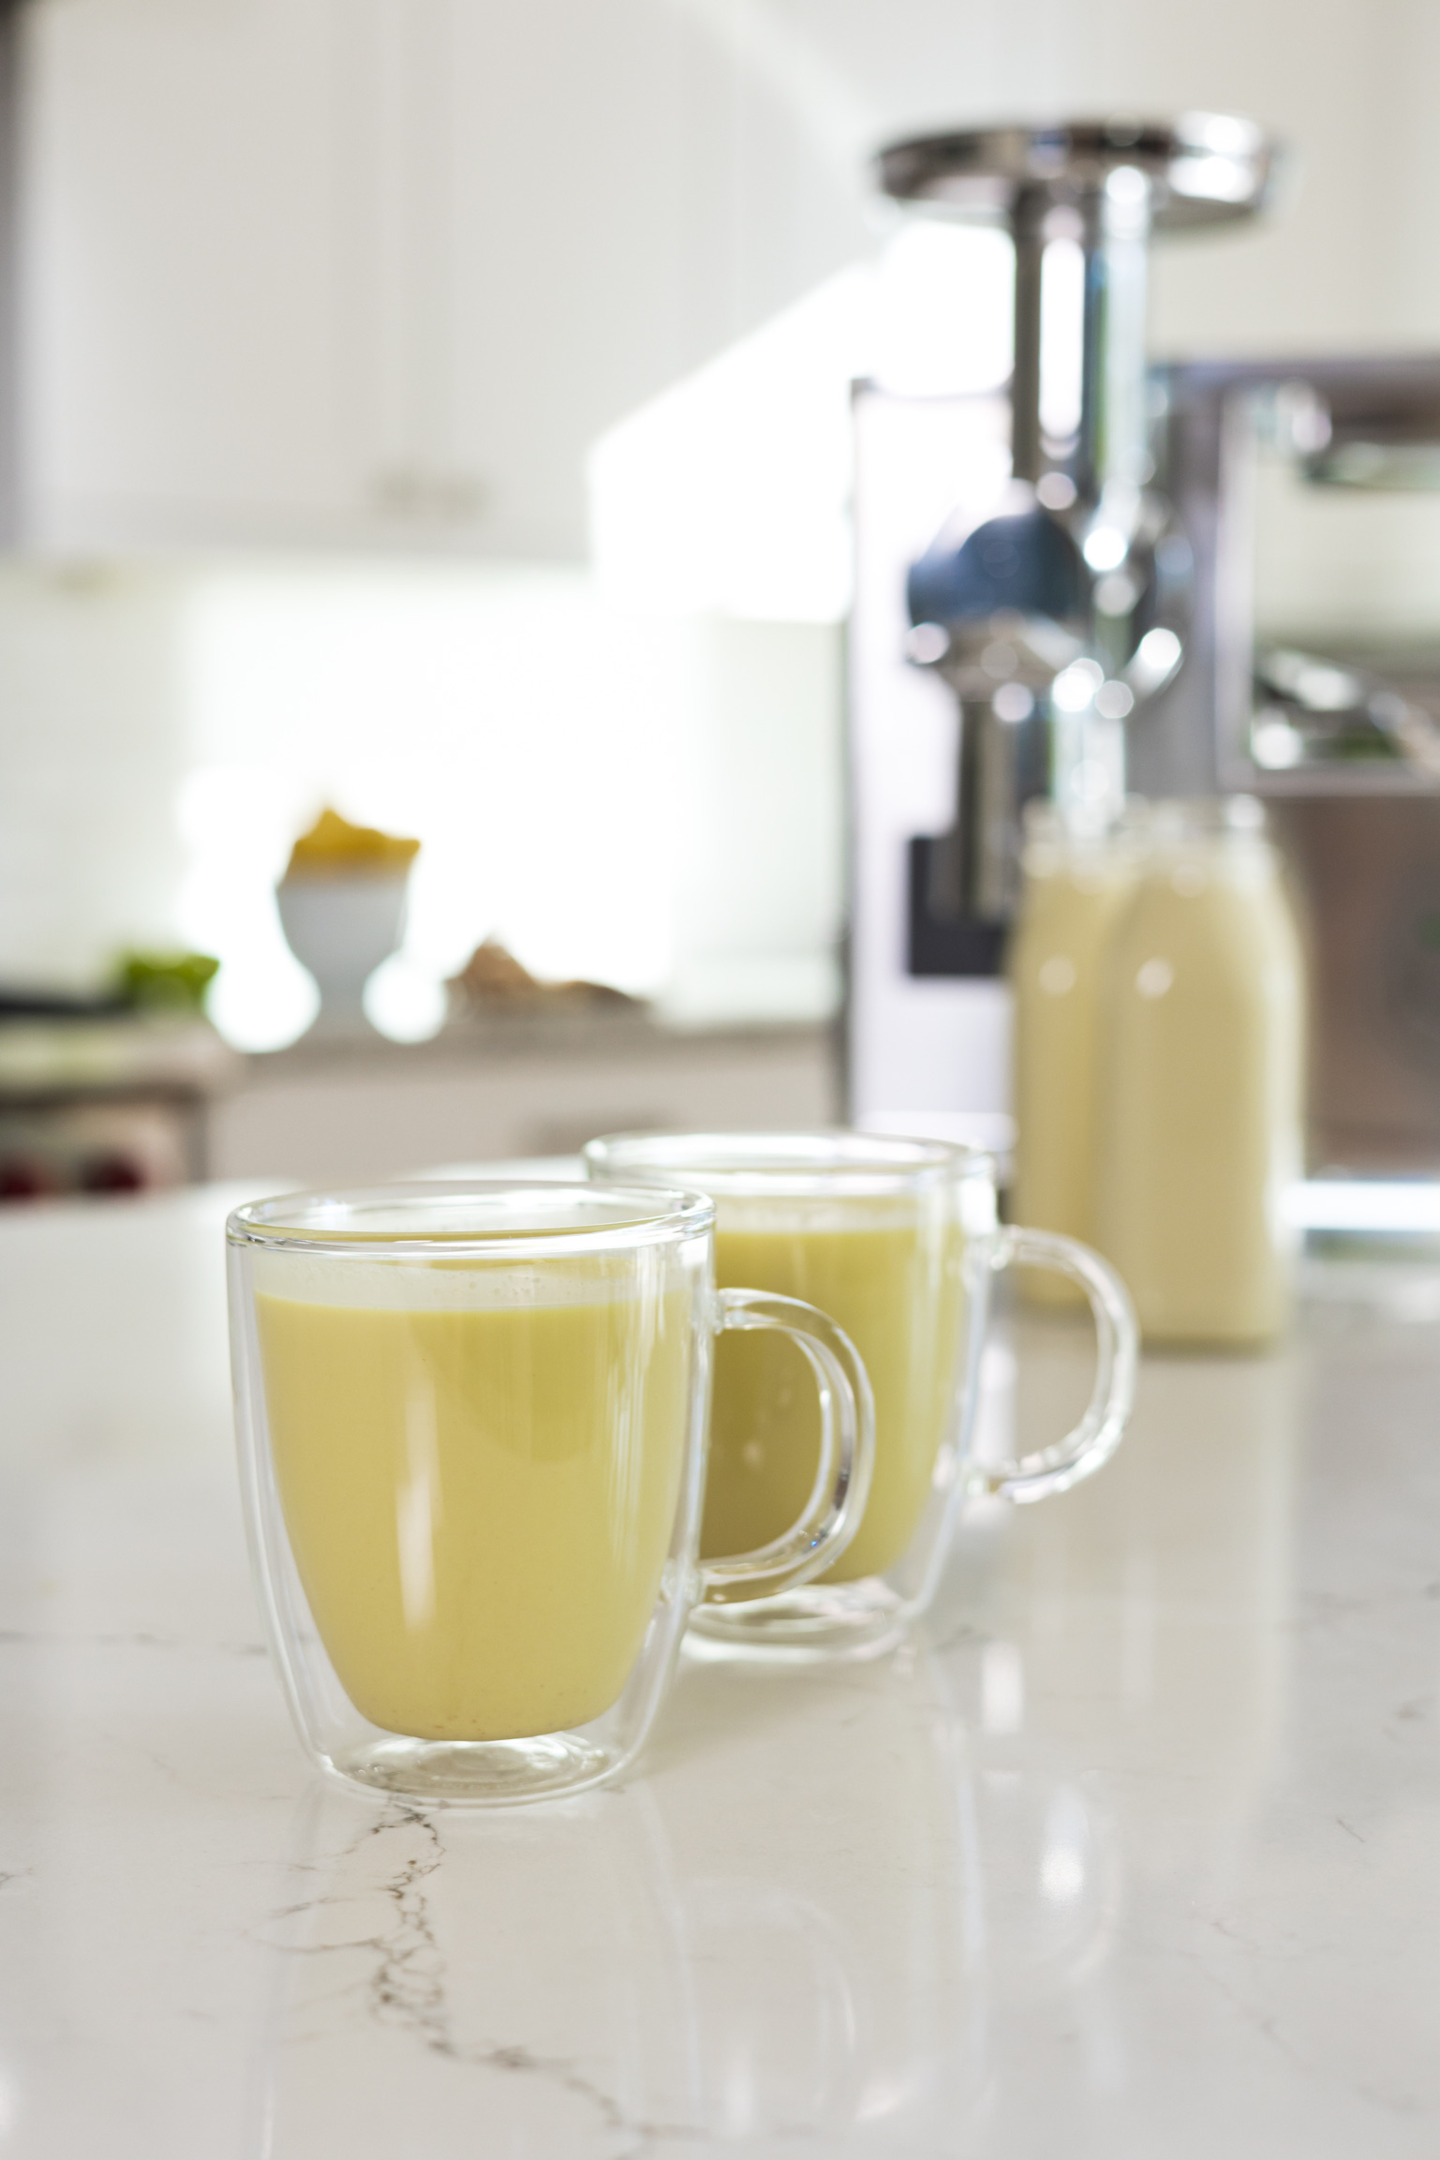 Two glass mugs hold warm golden milk, or turmeric milk, a delicious beverage made from homemade almond milk.